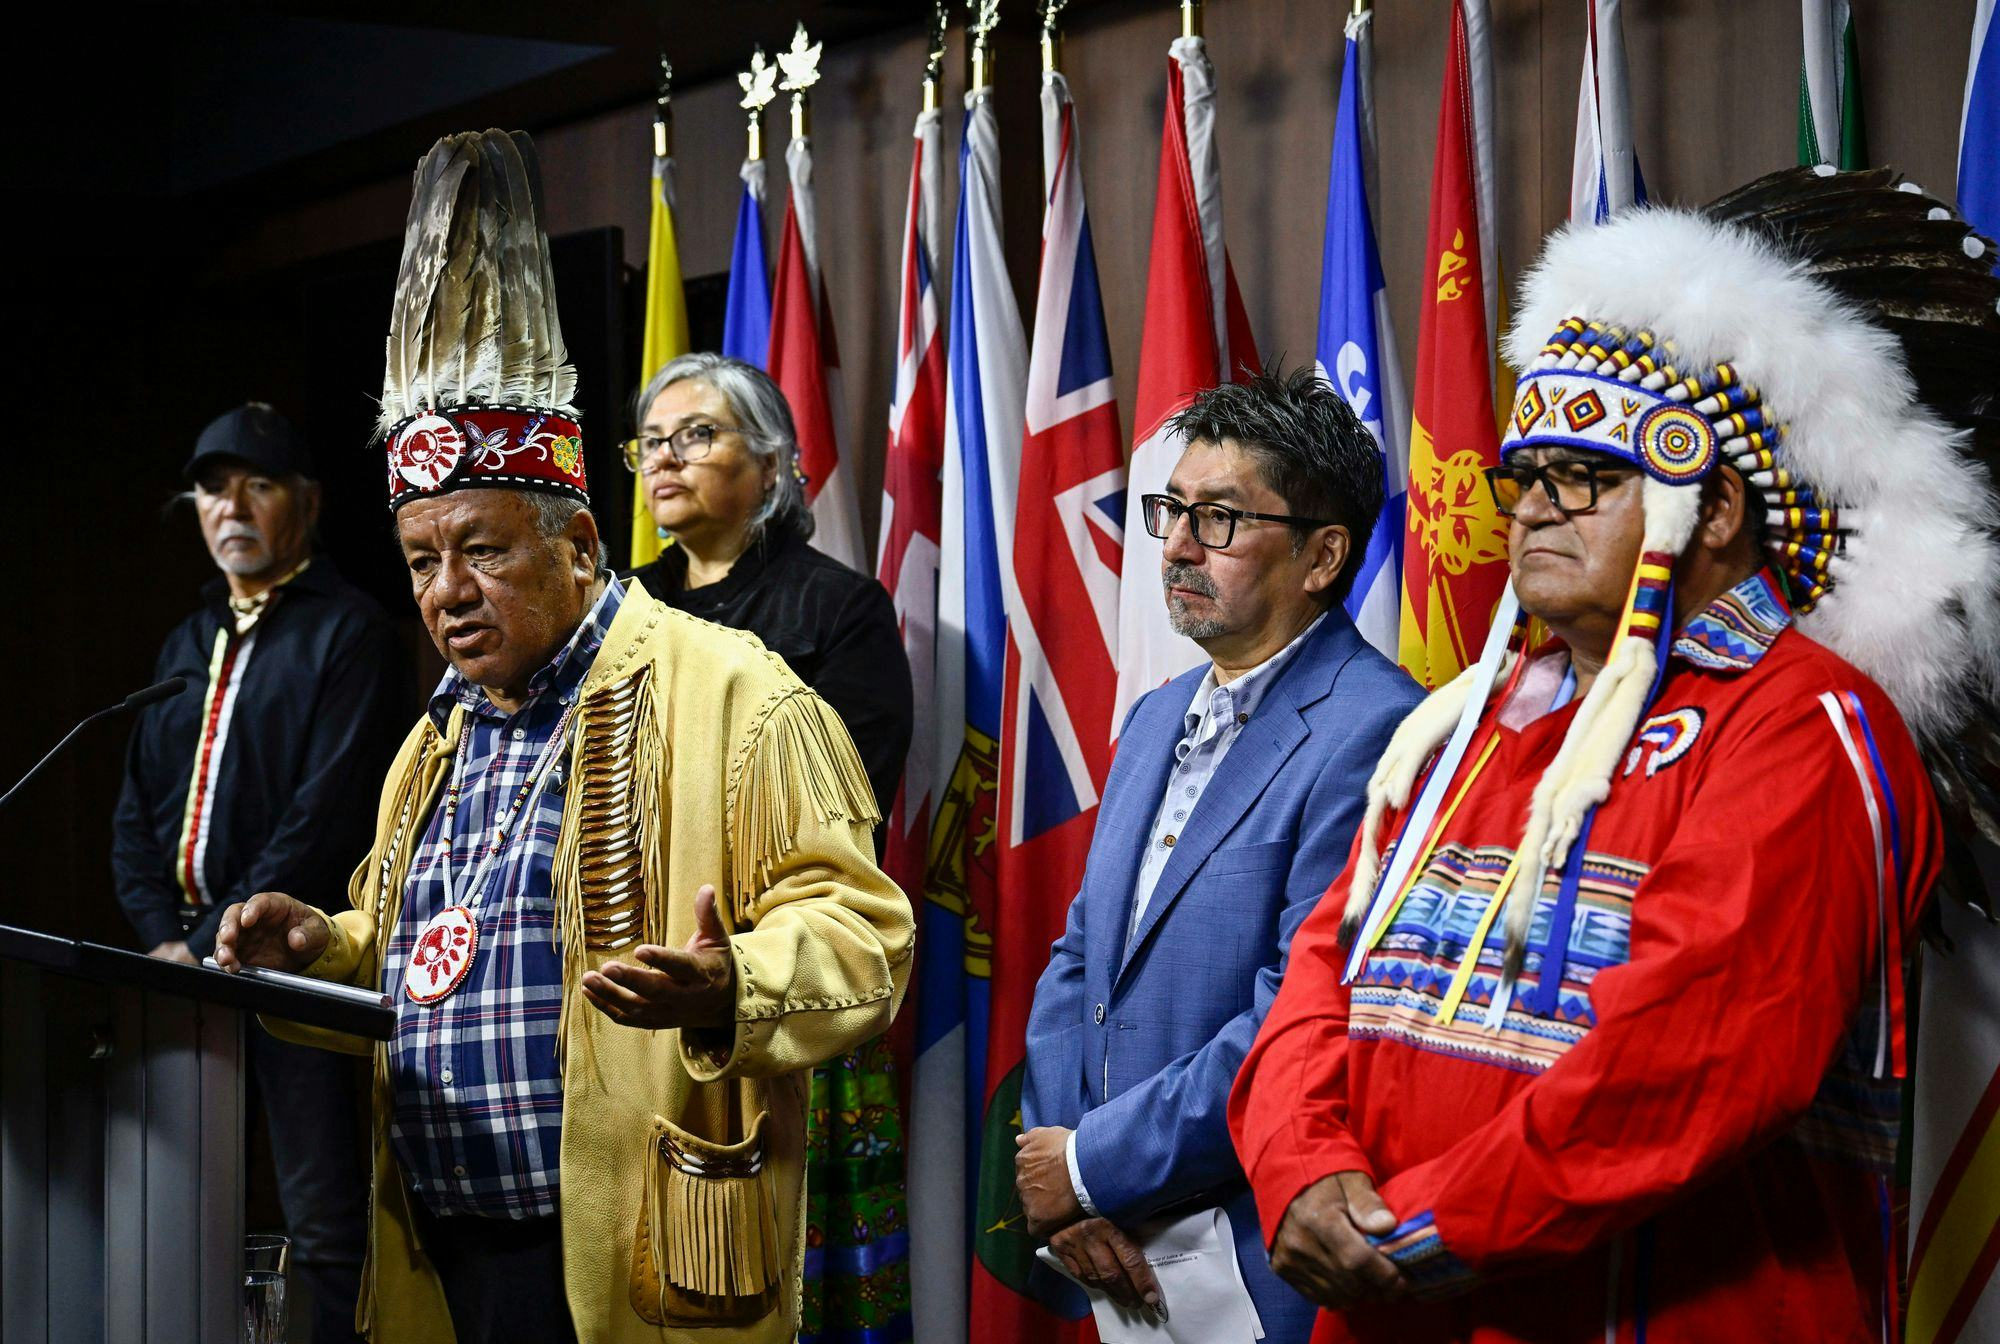 Métis nations lobbying for self-government law following First Nations opposition